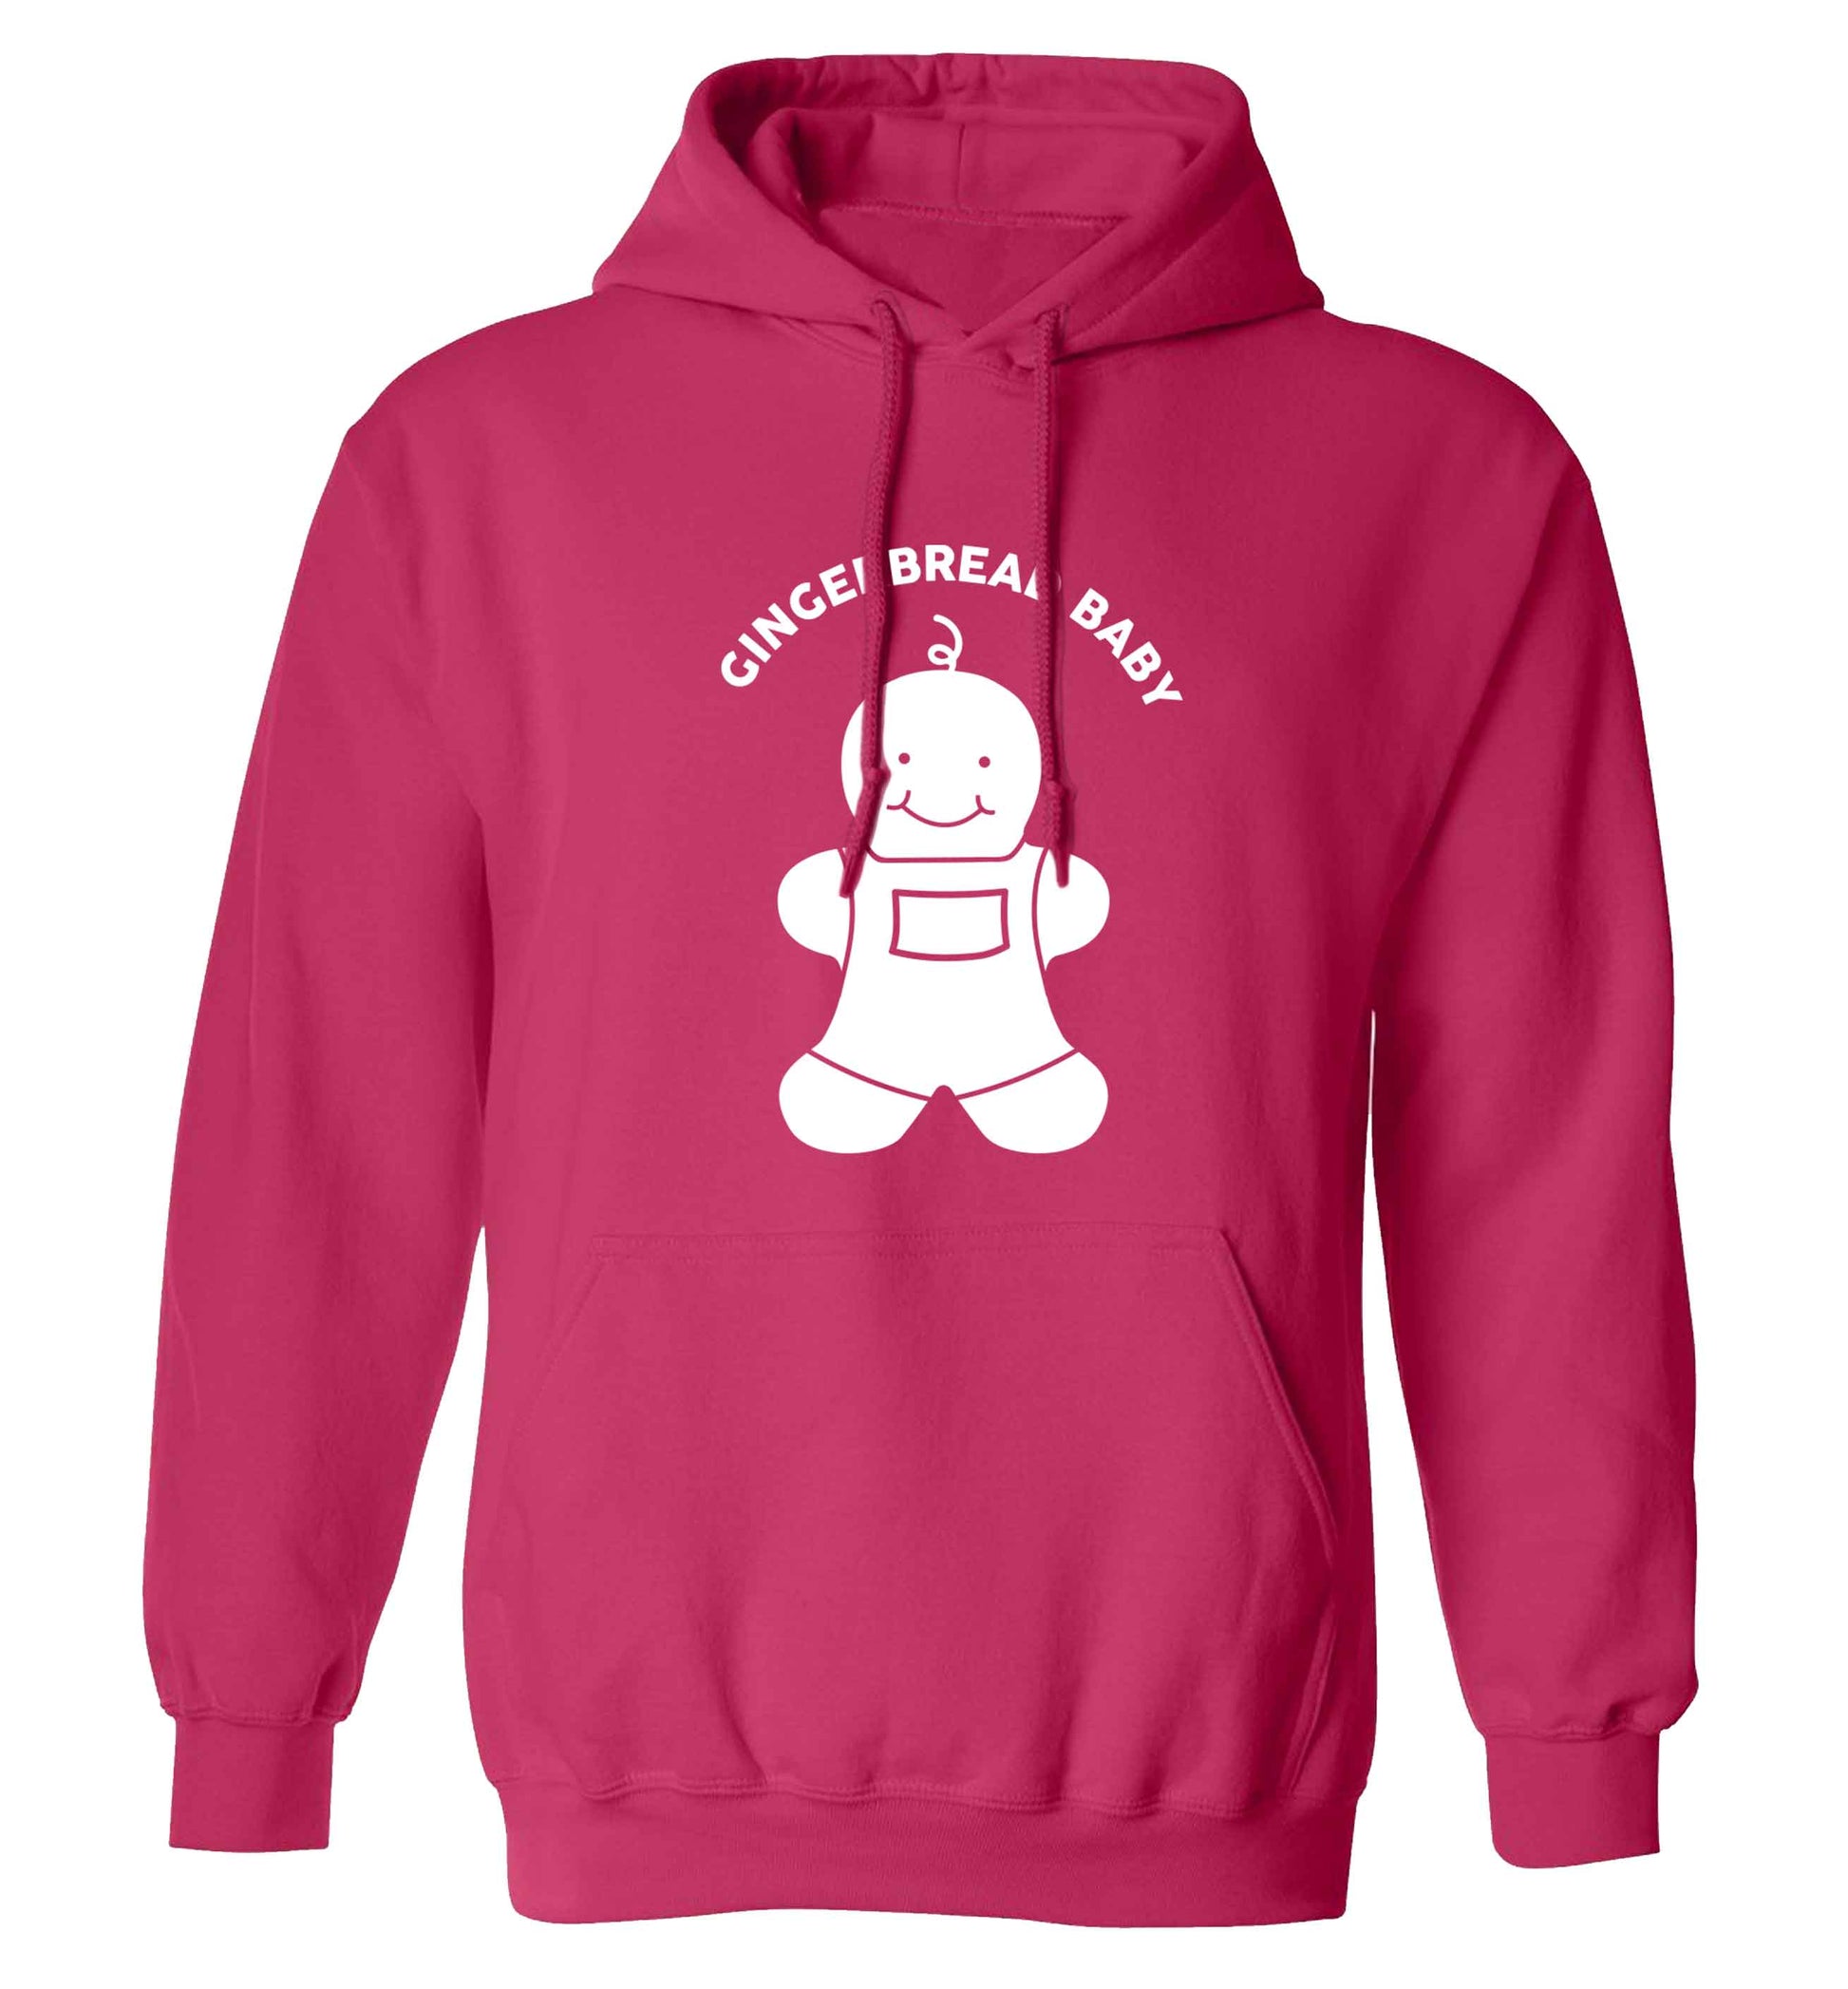 Gingerbread baby adults unisex pink hoodie 2XL